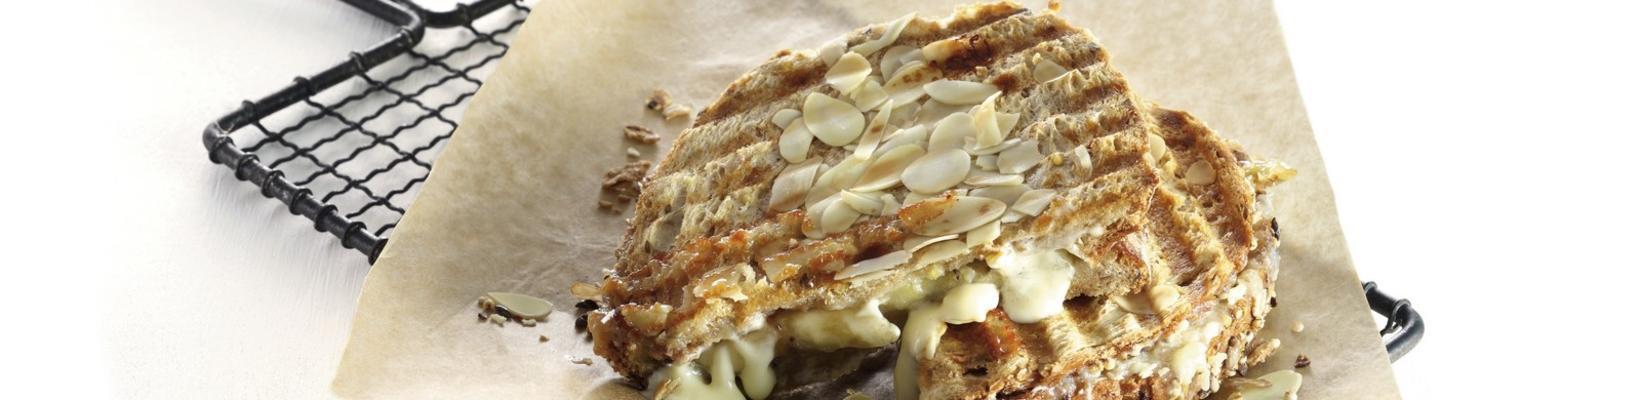 sandwich with white chocolate, almonds and banana